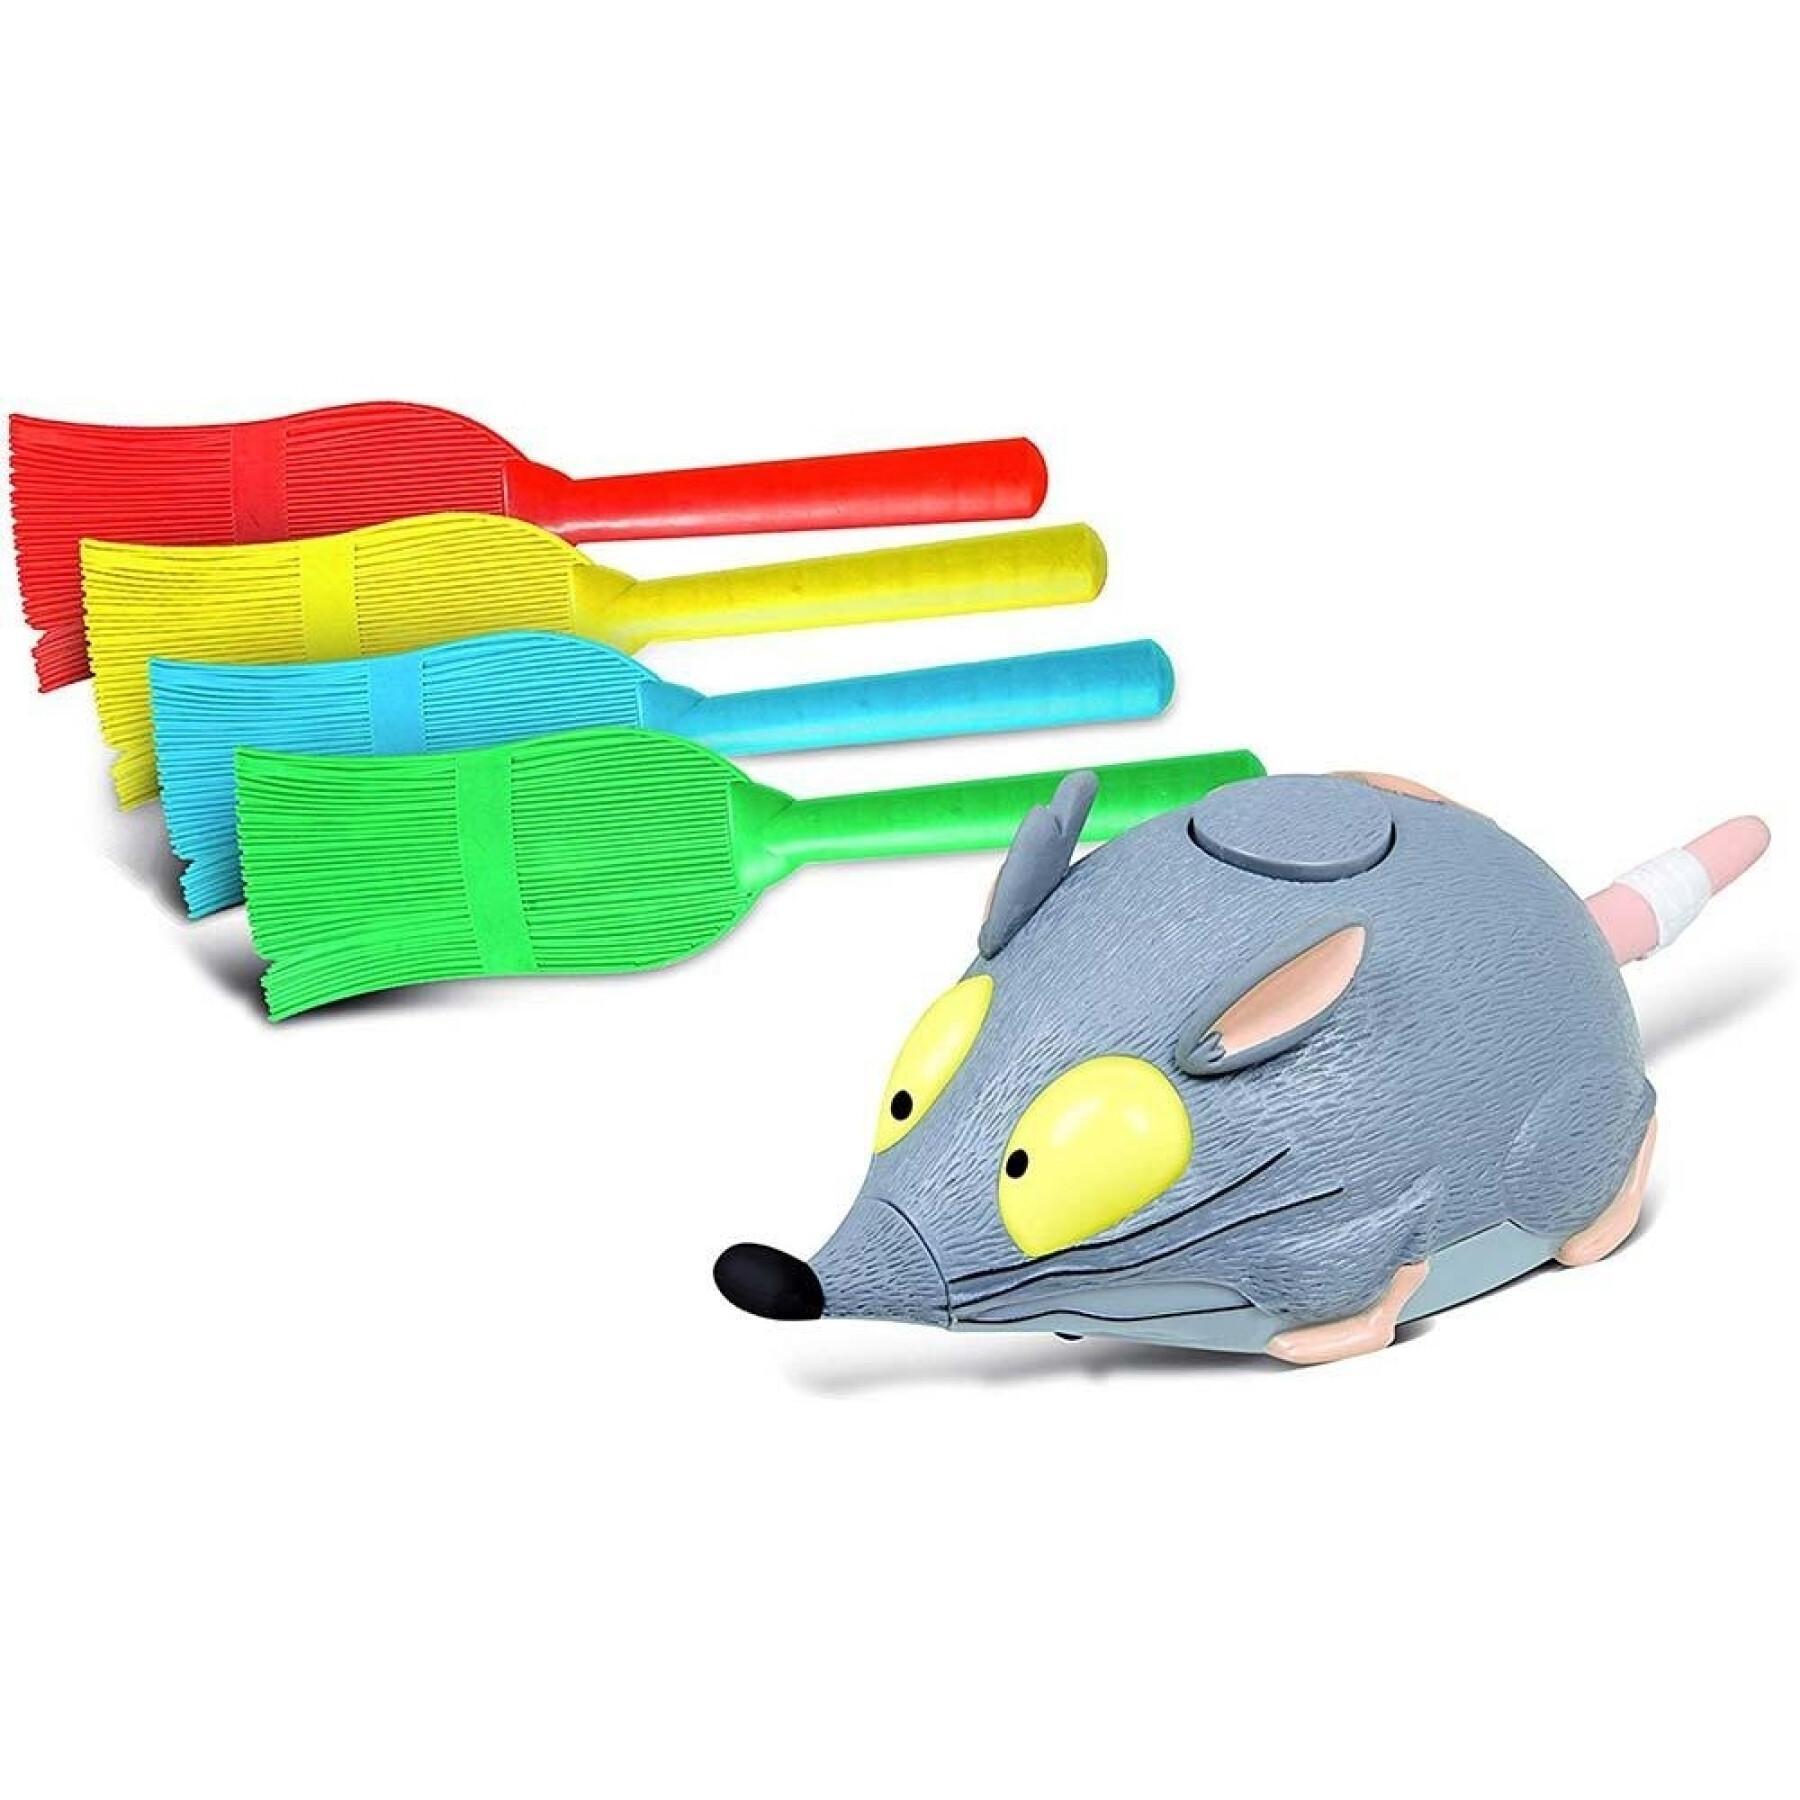 Mouse catching skill games IMC Toys